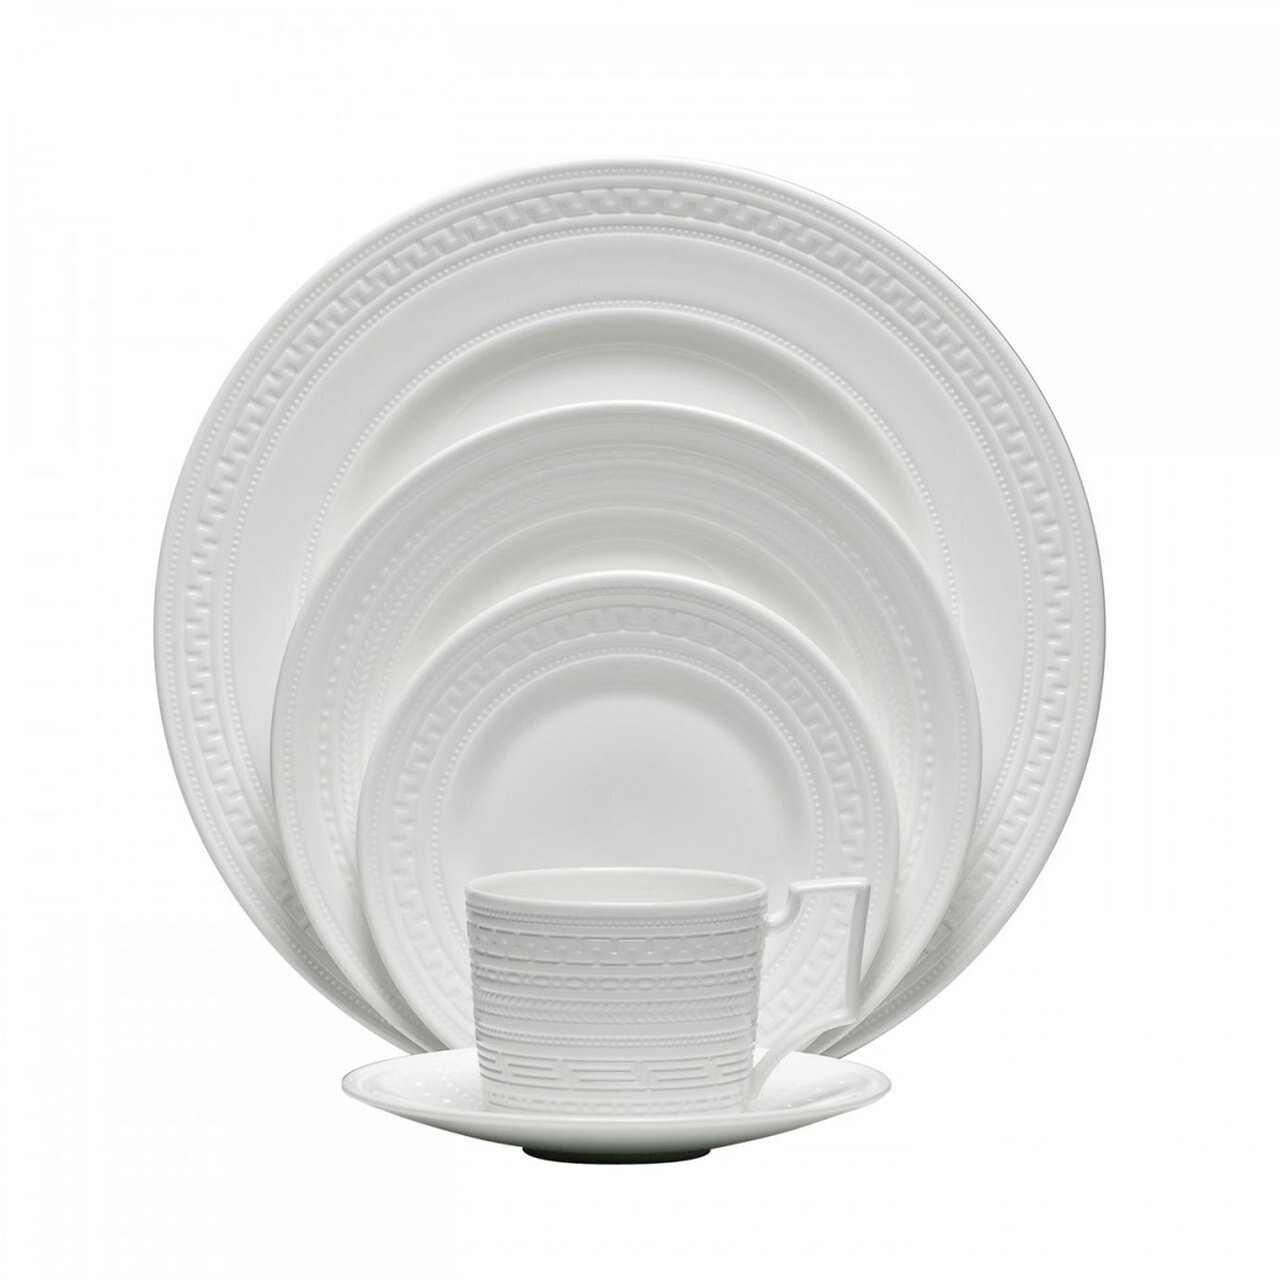 Wedgwood Intaglio Five 5 Piece Place Setting